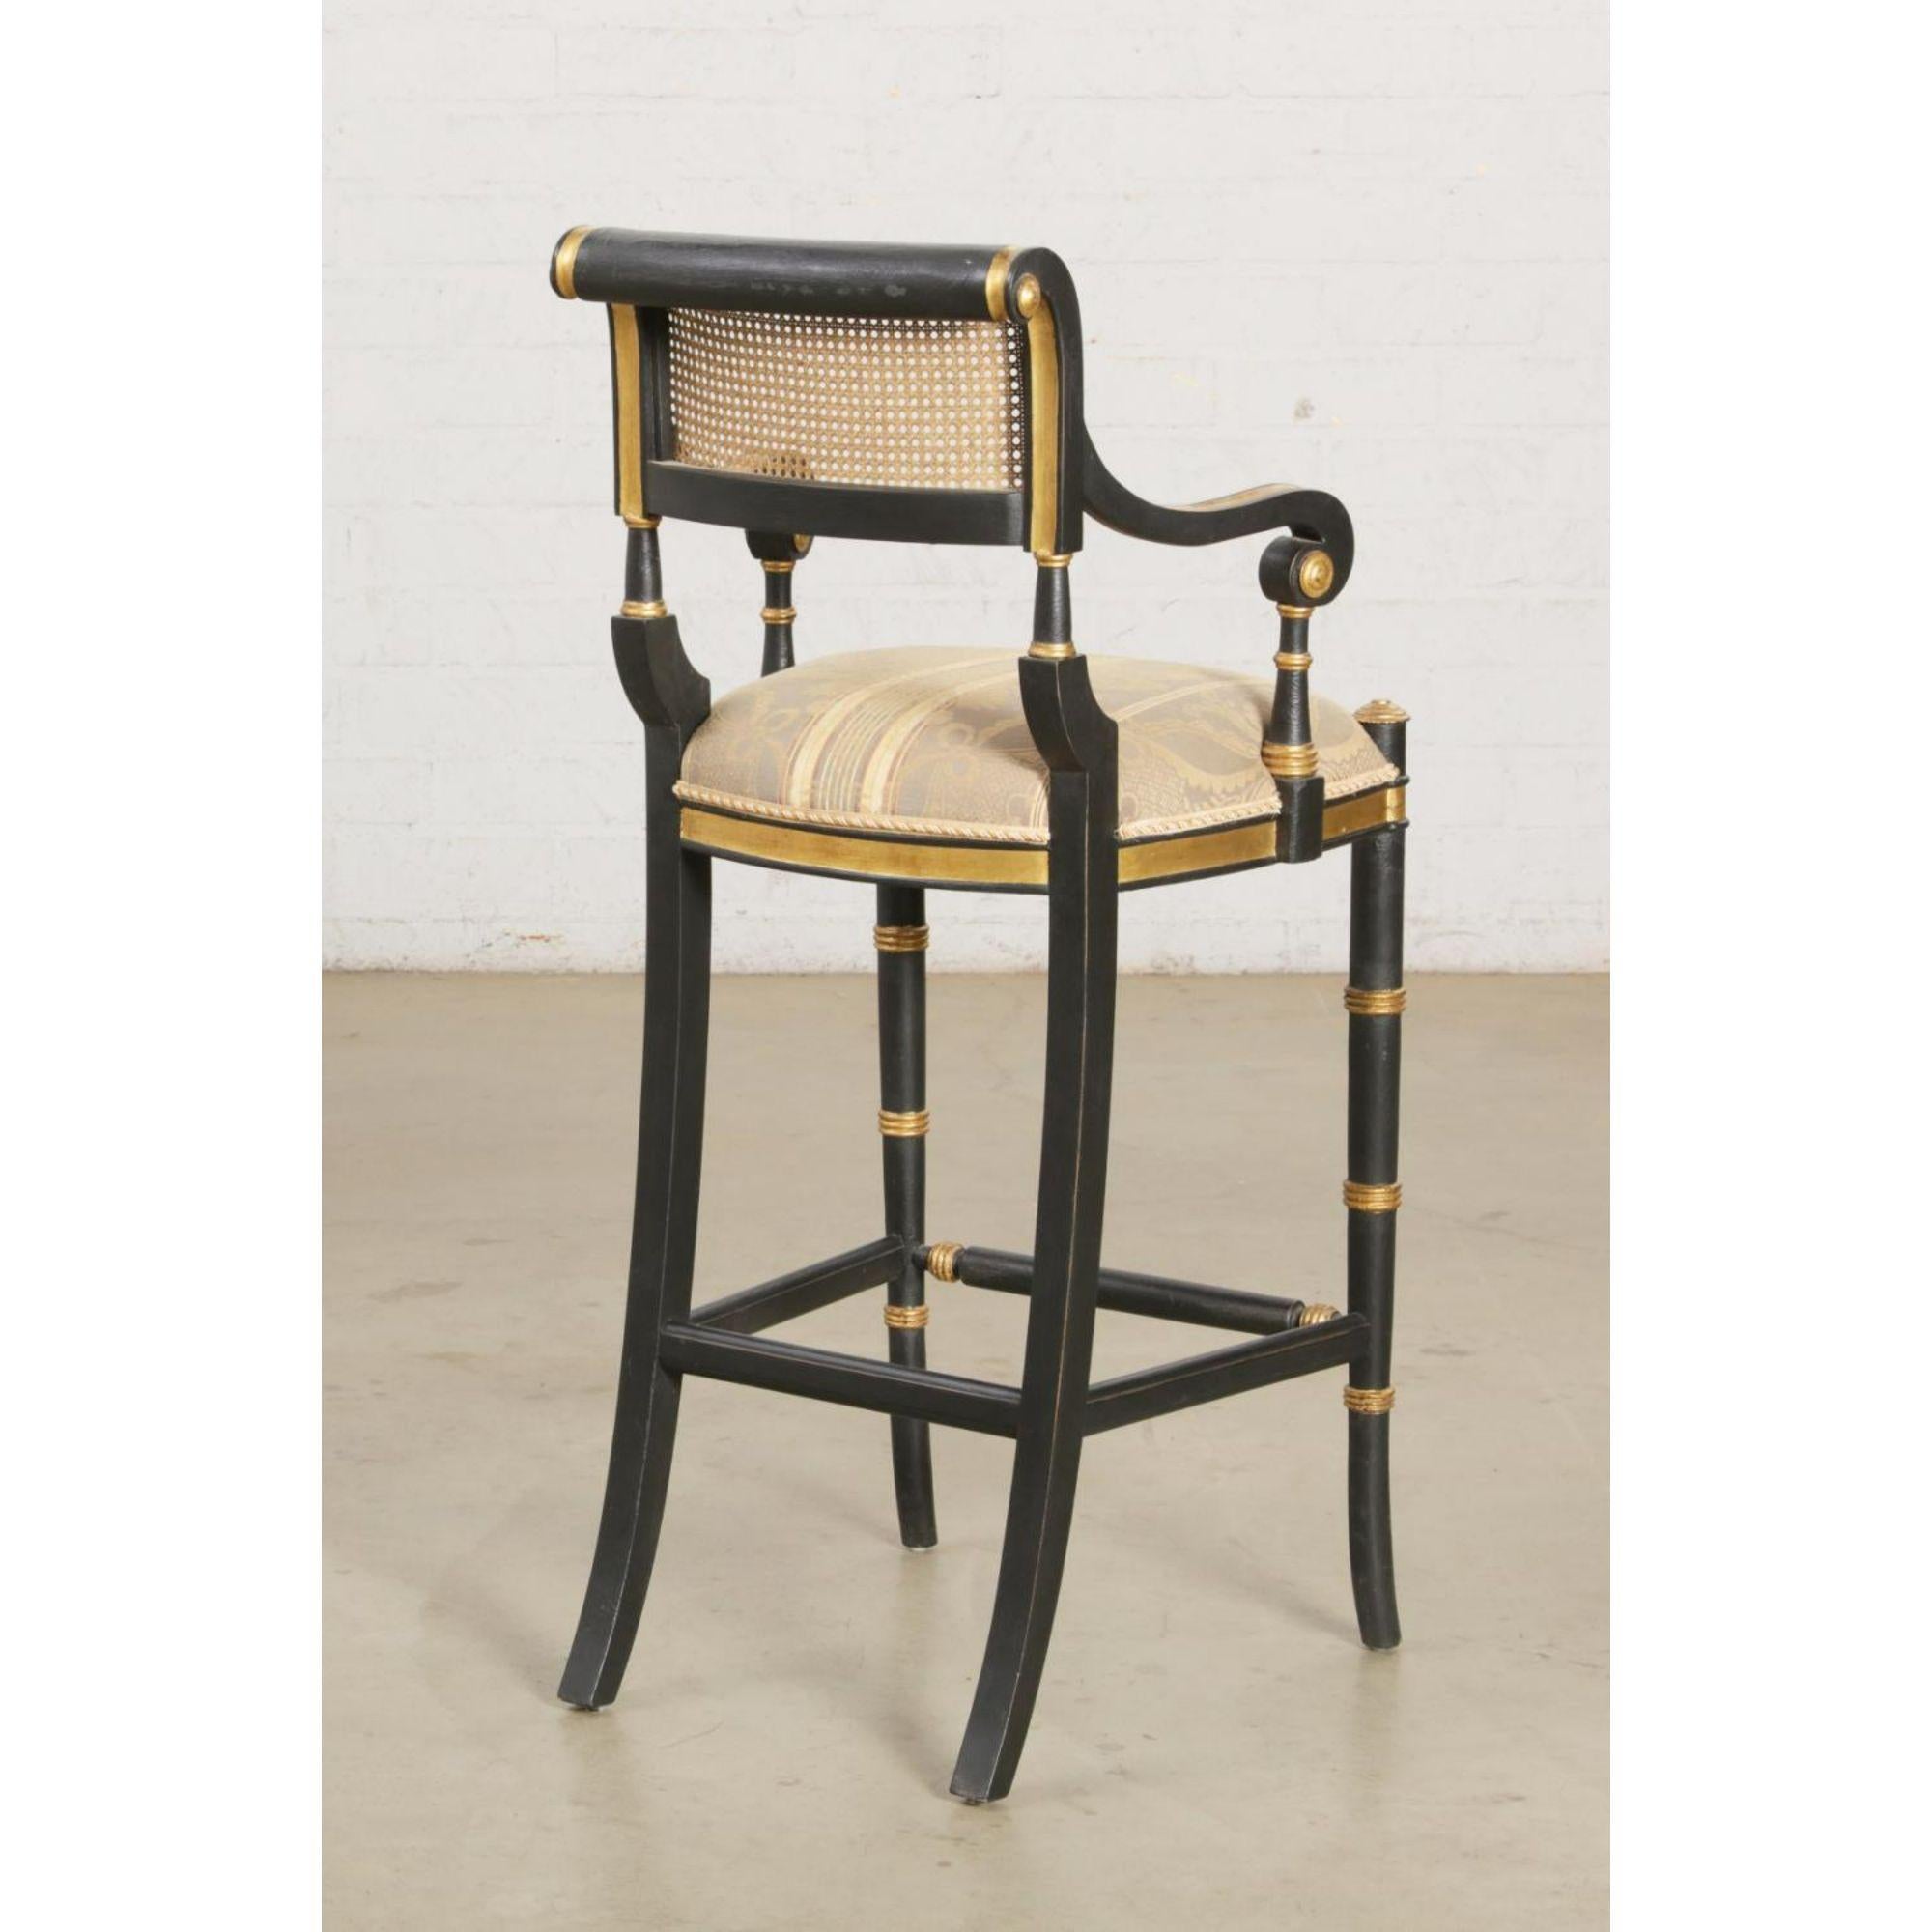 Regency Style Minton-Spidell Mansfield Giltwood & Ebony Caned Bar Stool - Mansfield

Additional information: 
Materials: Caning, Giltwood
Color: Black
Period: 2010s
Styles: Regency
Number of Seats: 1
Item Type: Vintage, Antique or